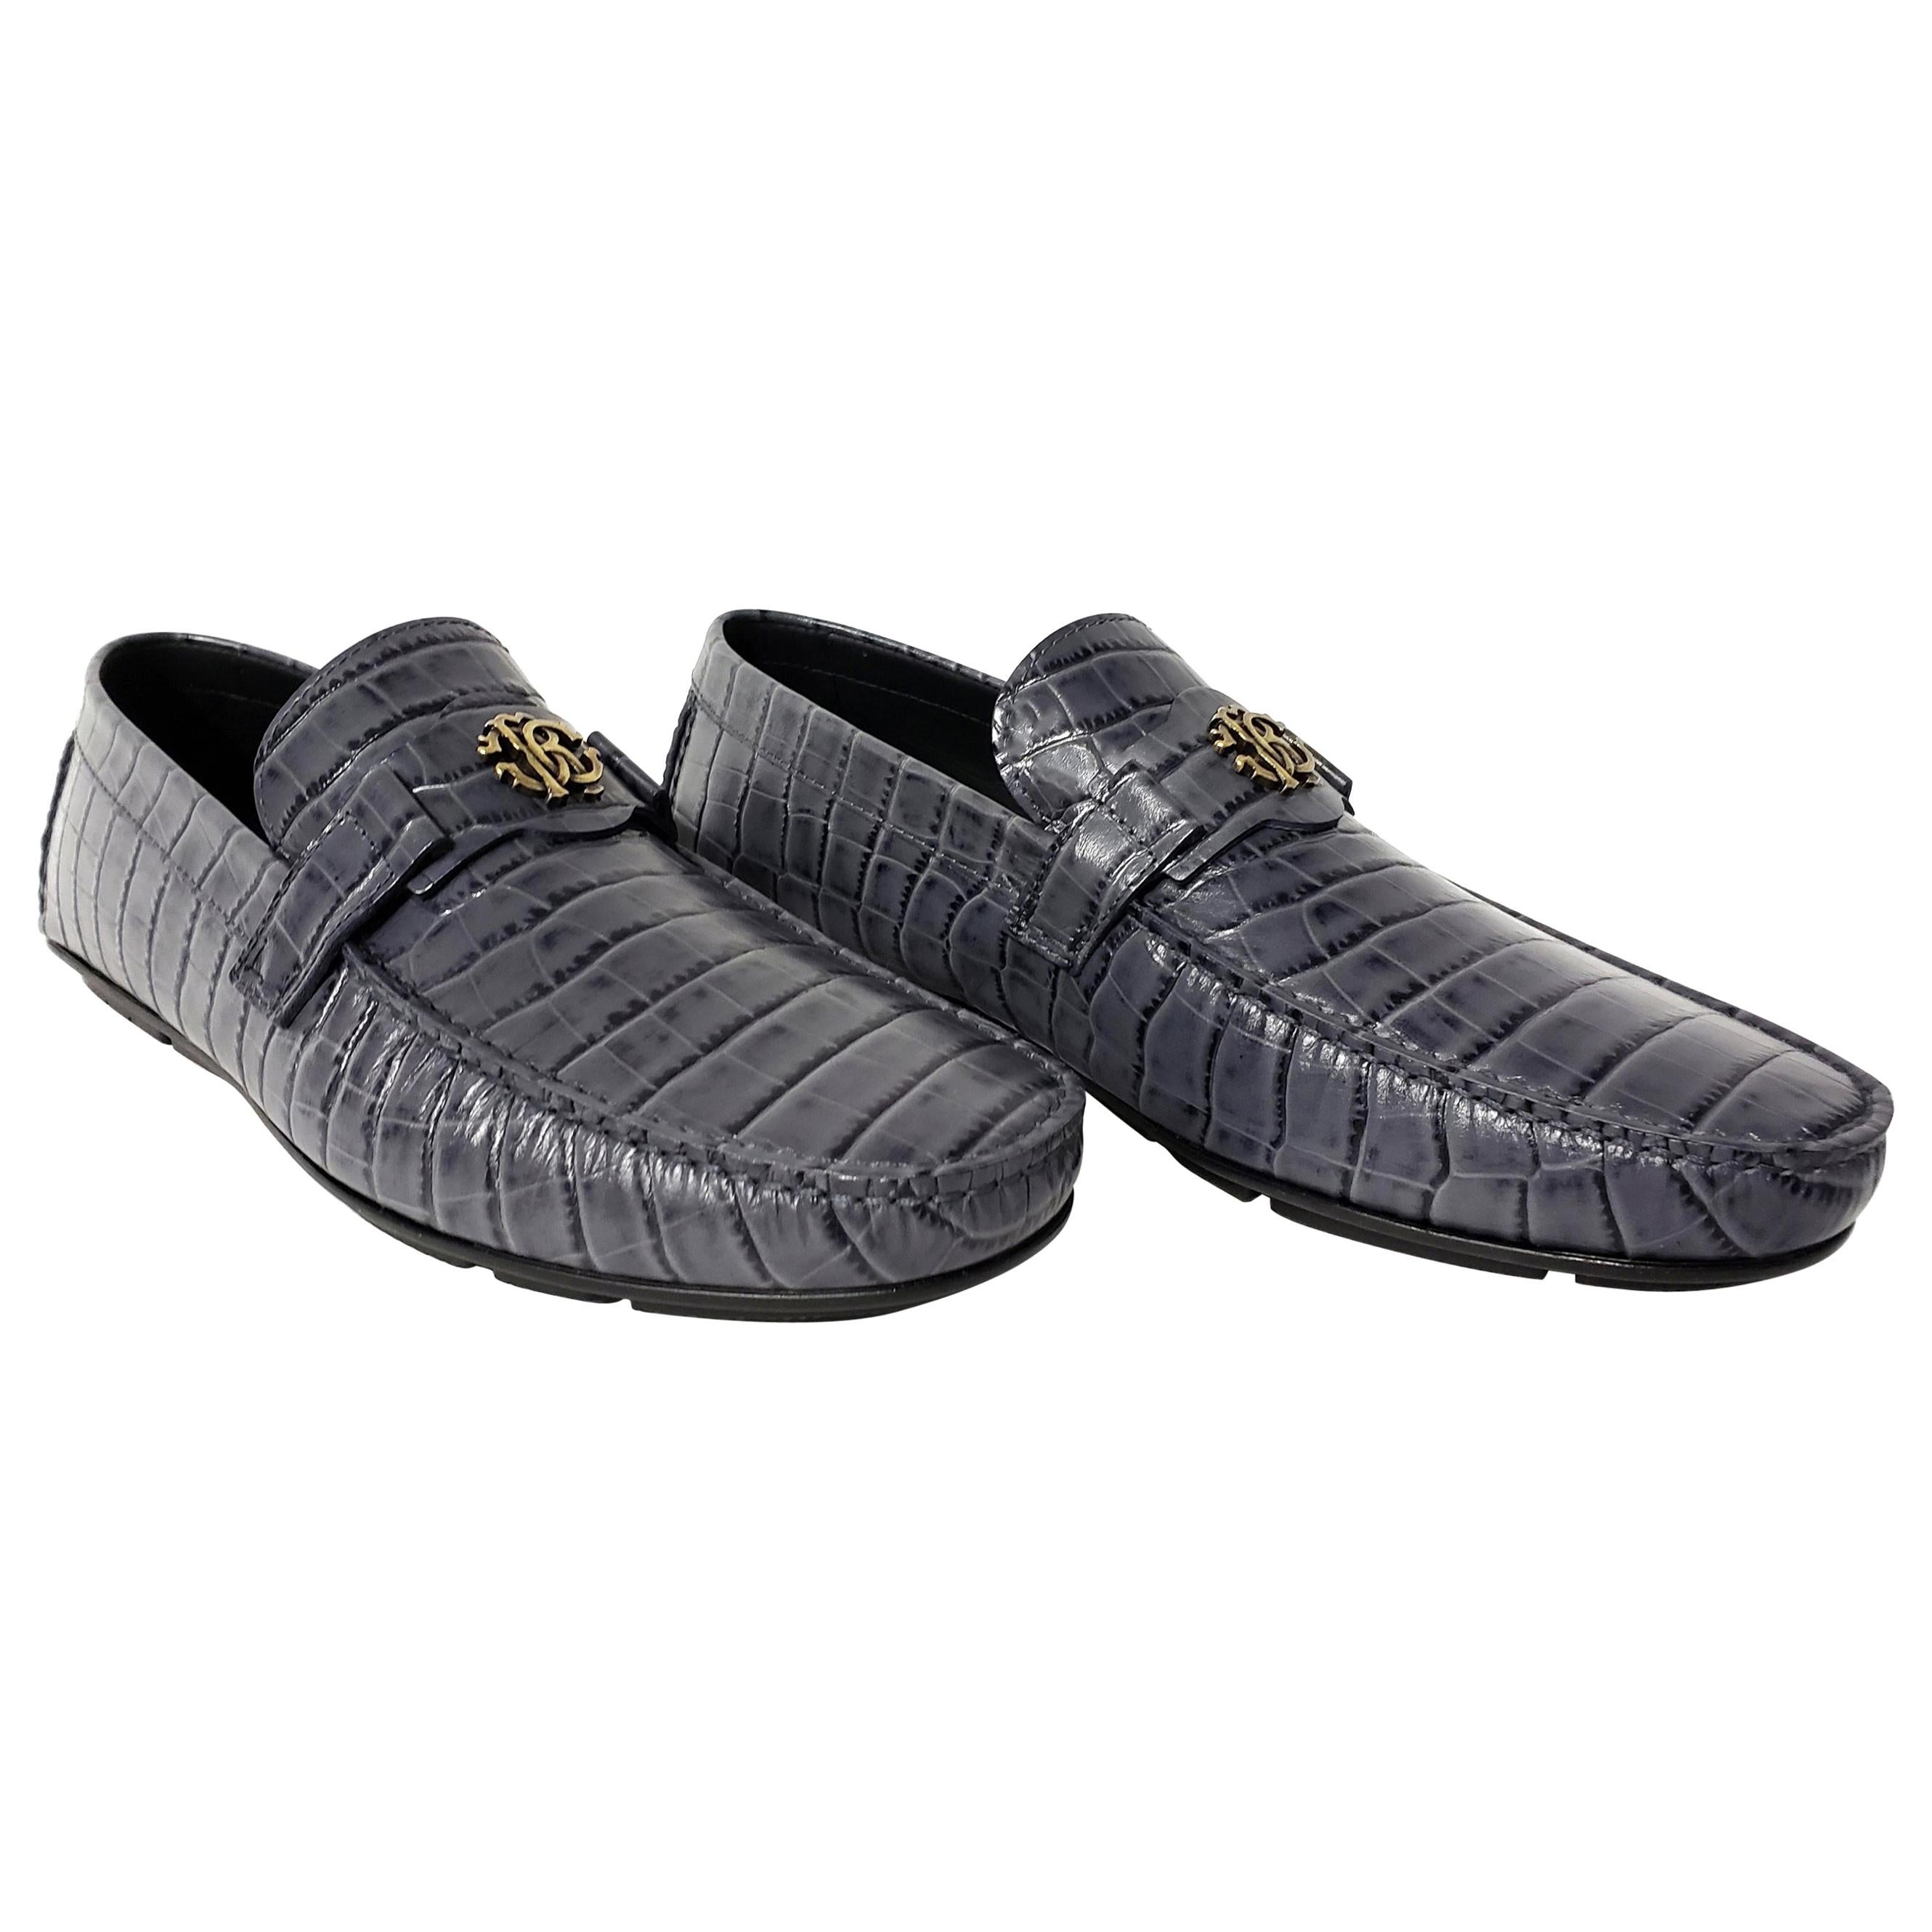 NEW ROBERTO CAVALLI GREY CROCODILE PRINT LEATHER LOAFERS SHOES for MEN 43 - 10